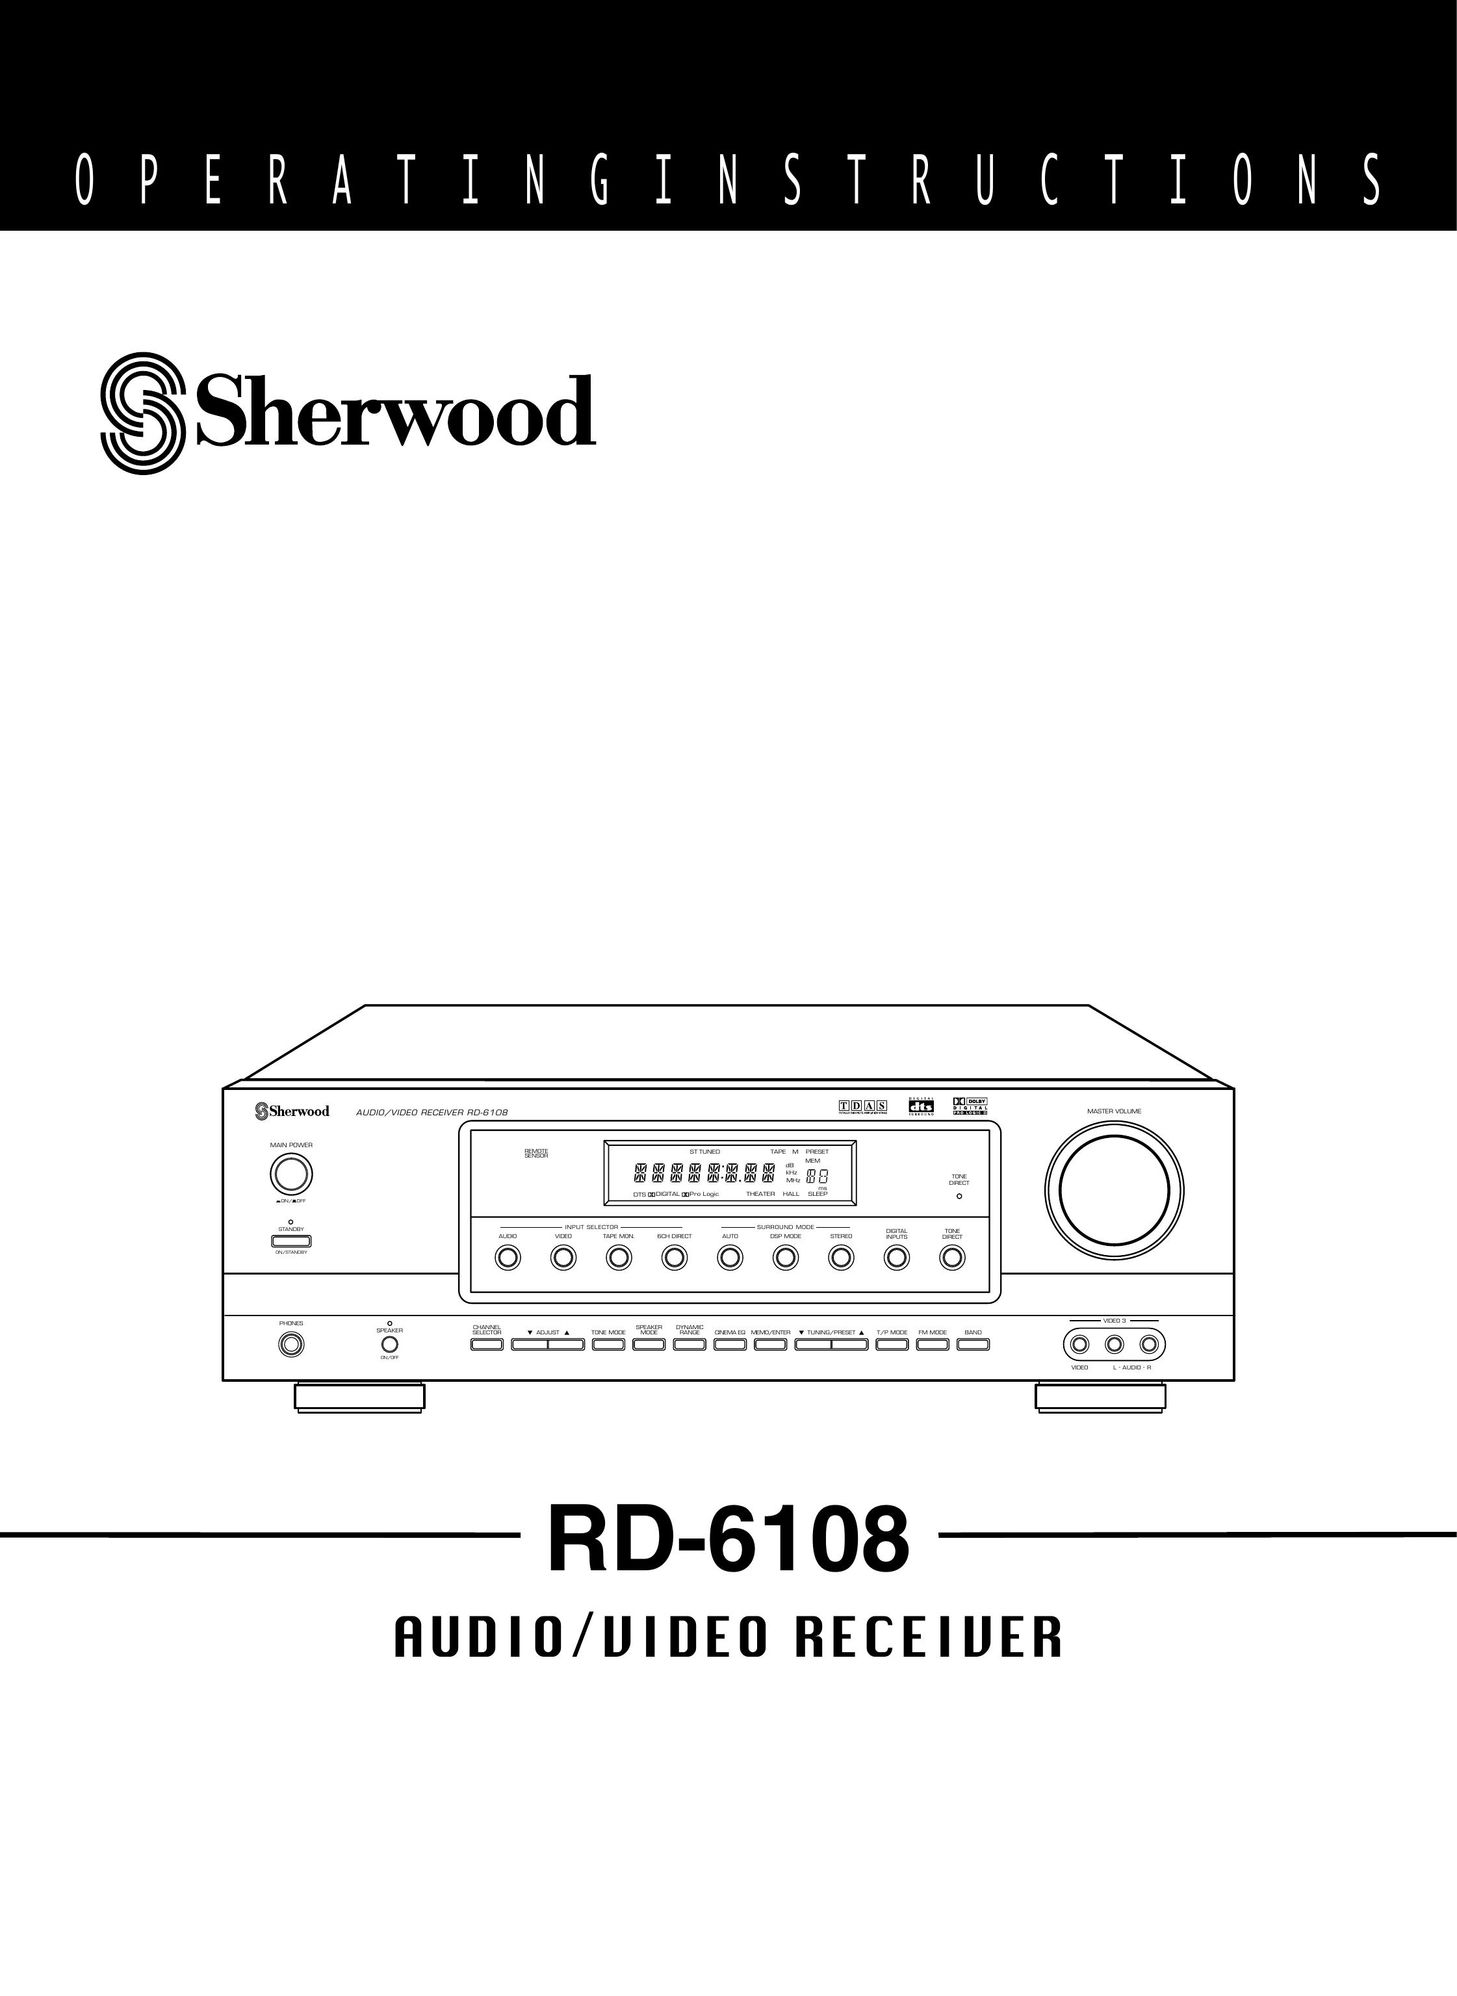 Sherwood RD-6108 Stereo System User Manual